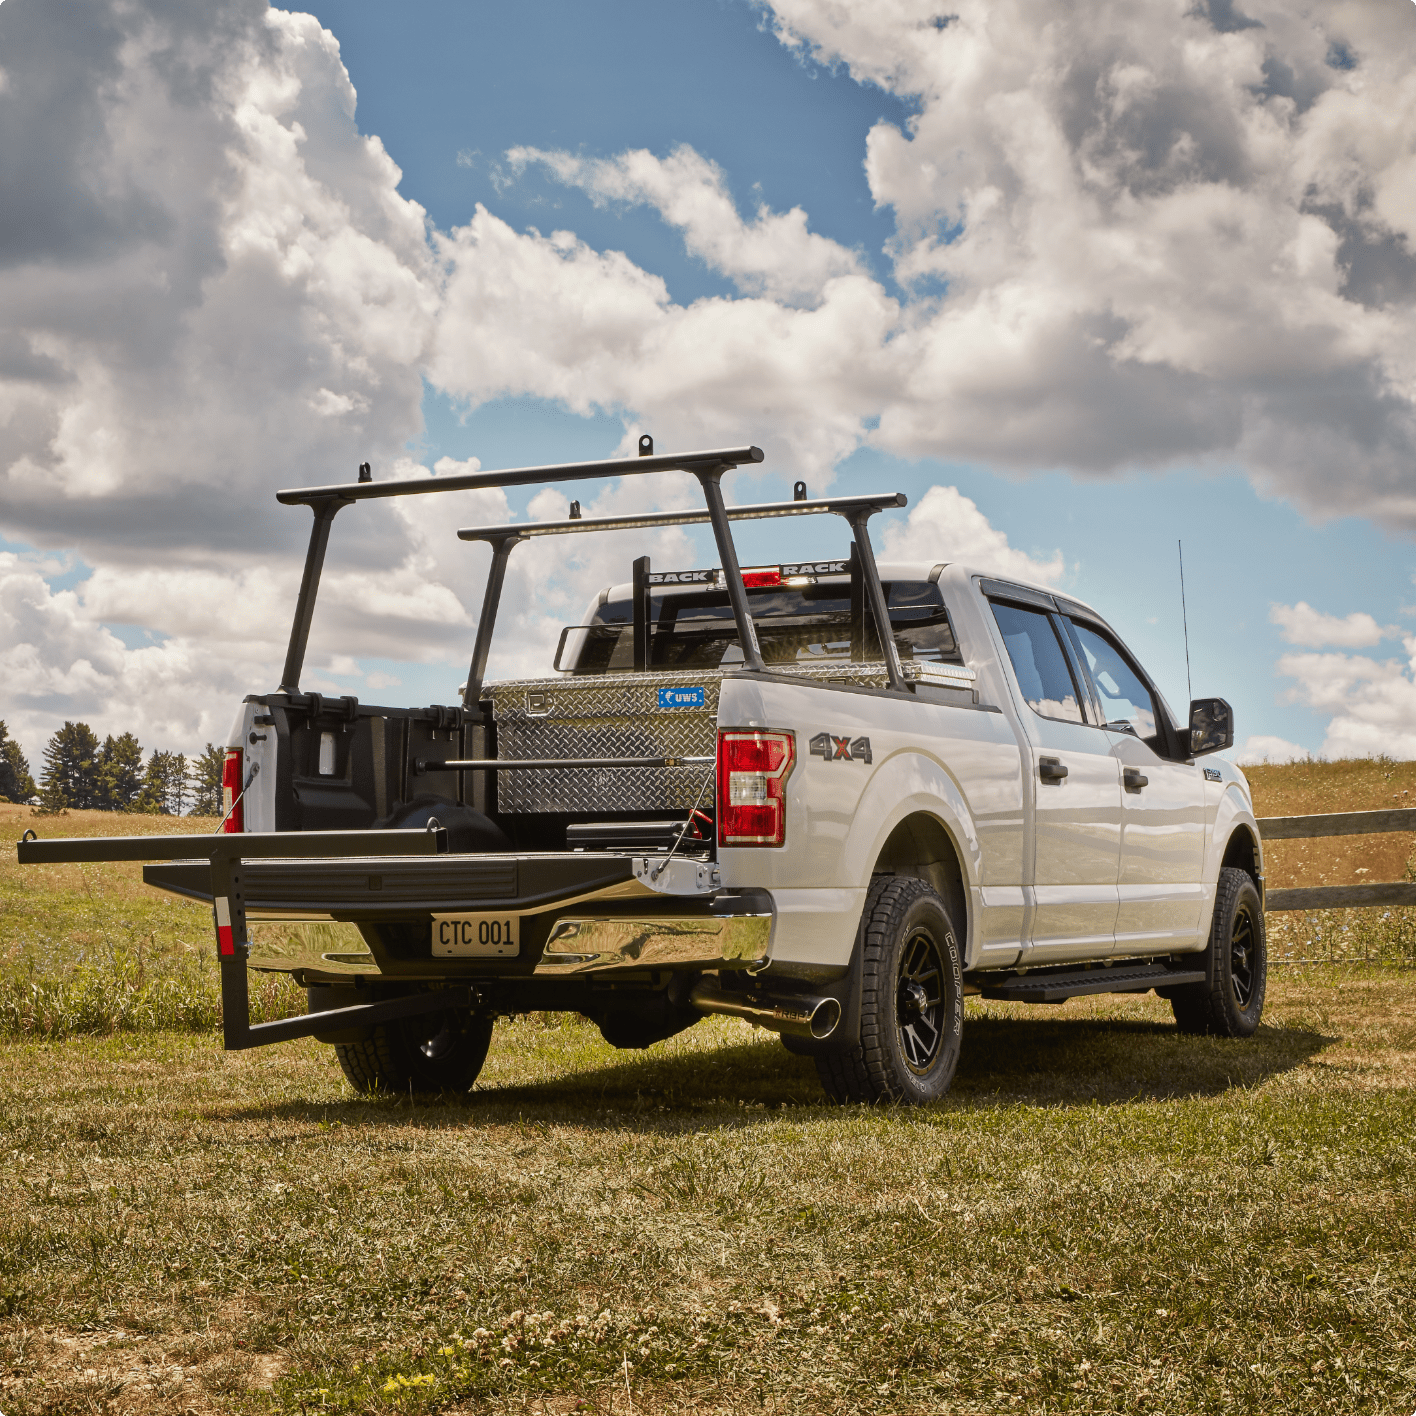 White truck in a field with a mounted black steel headache rack.